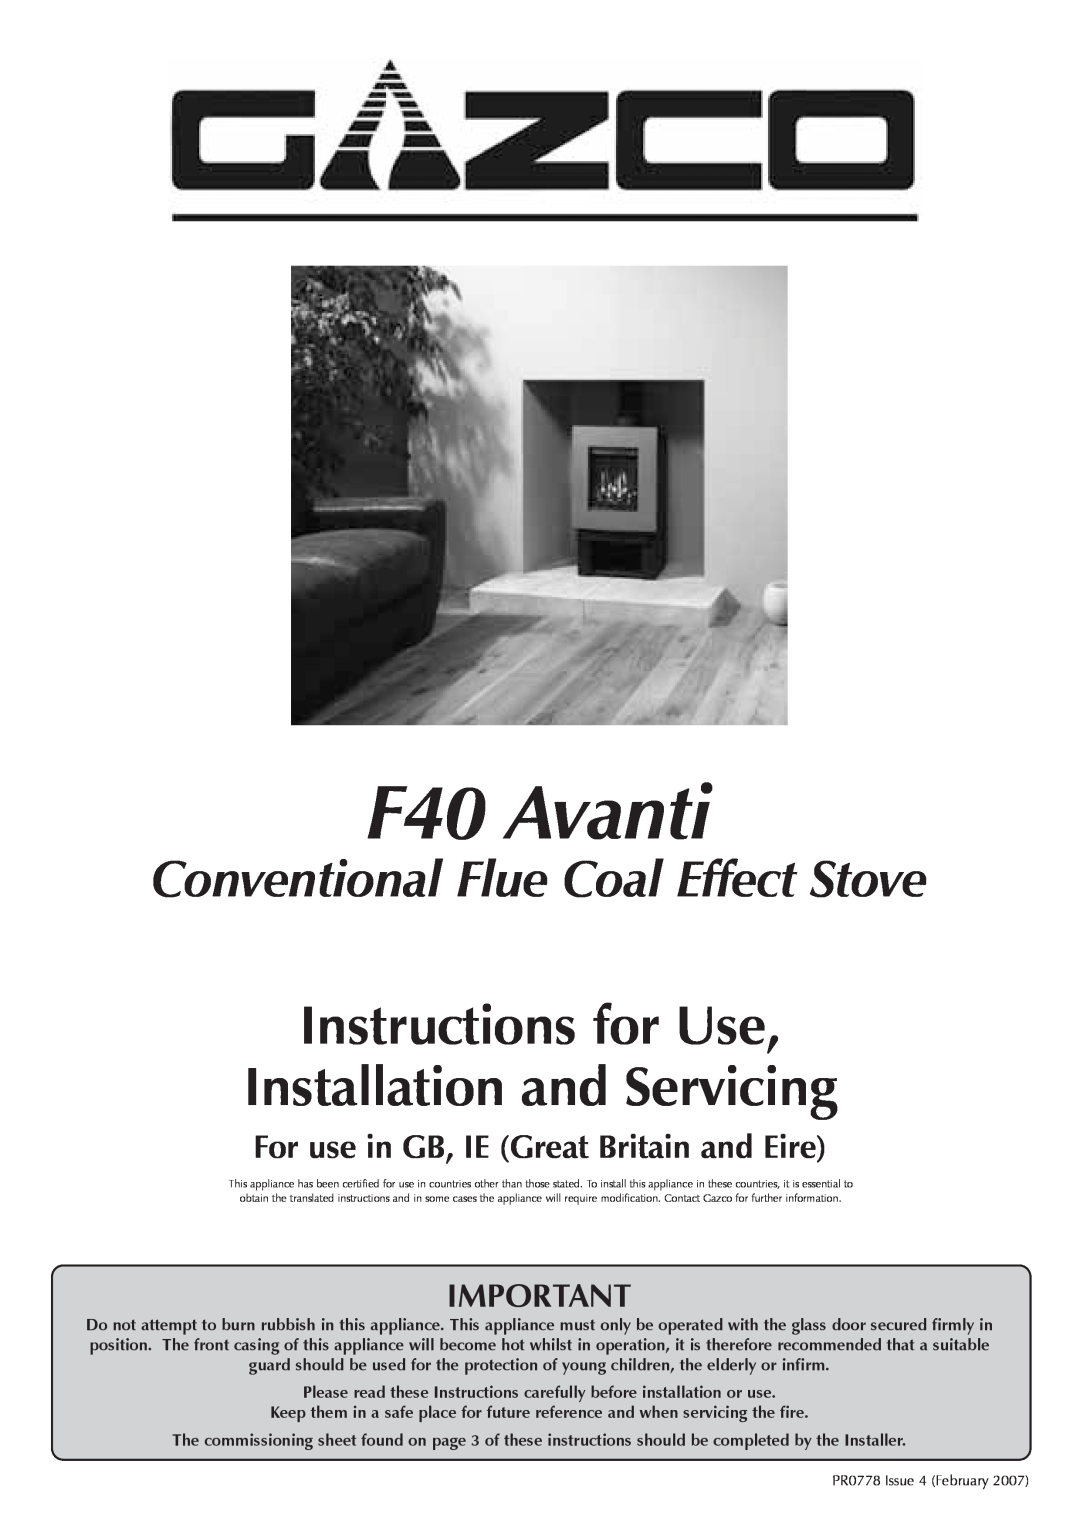 Stovax manual F40 Avanti, Instructions for Use Installation and Servicing, Conventional Flue Coal Effect Stove 